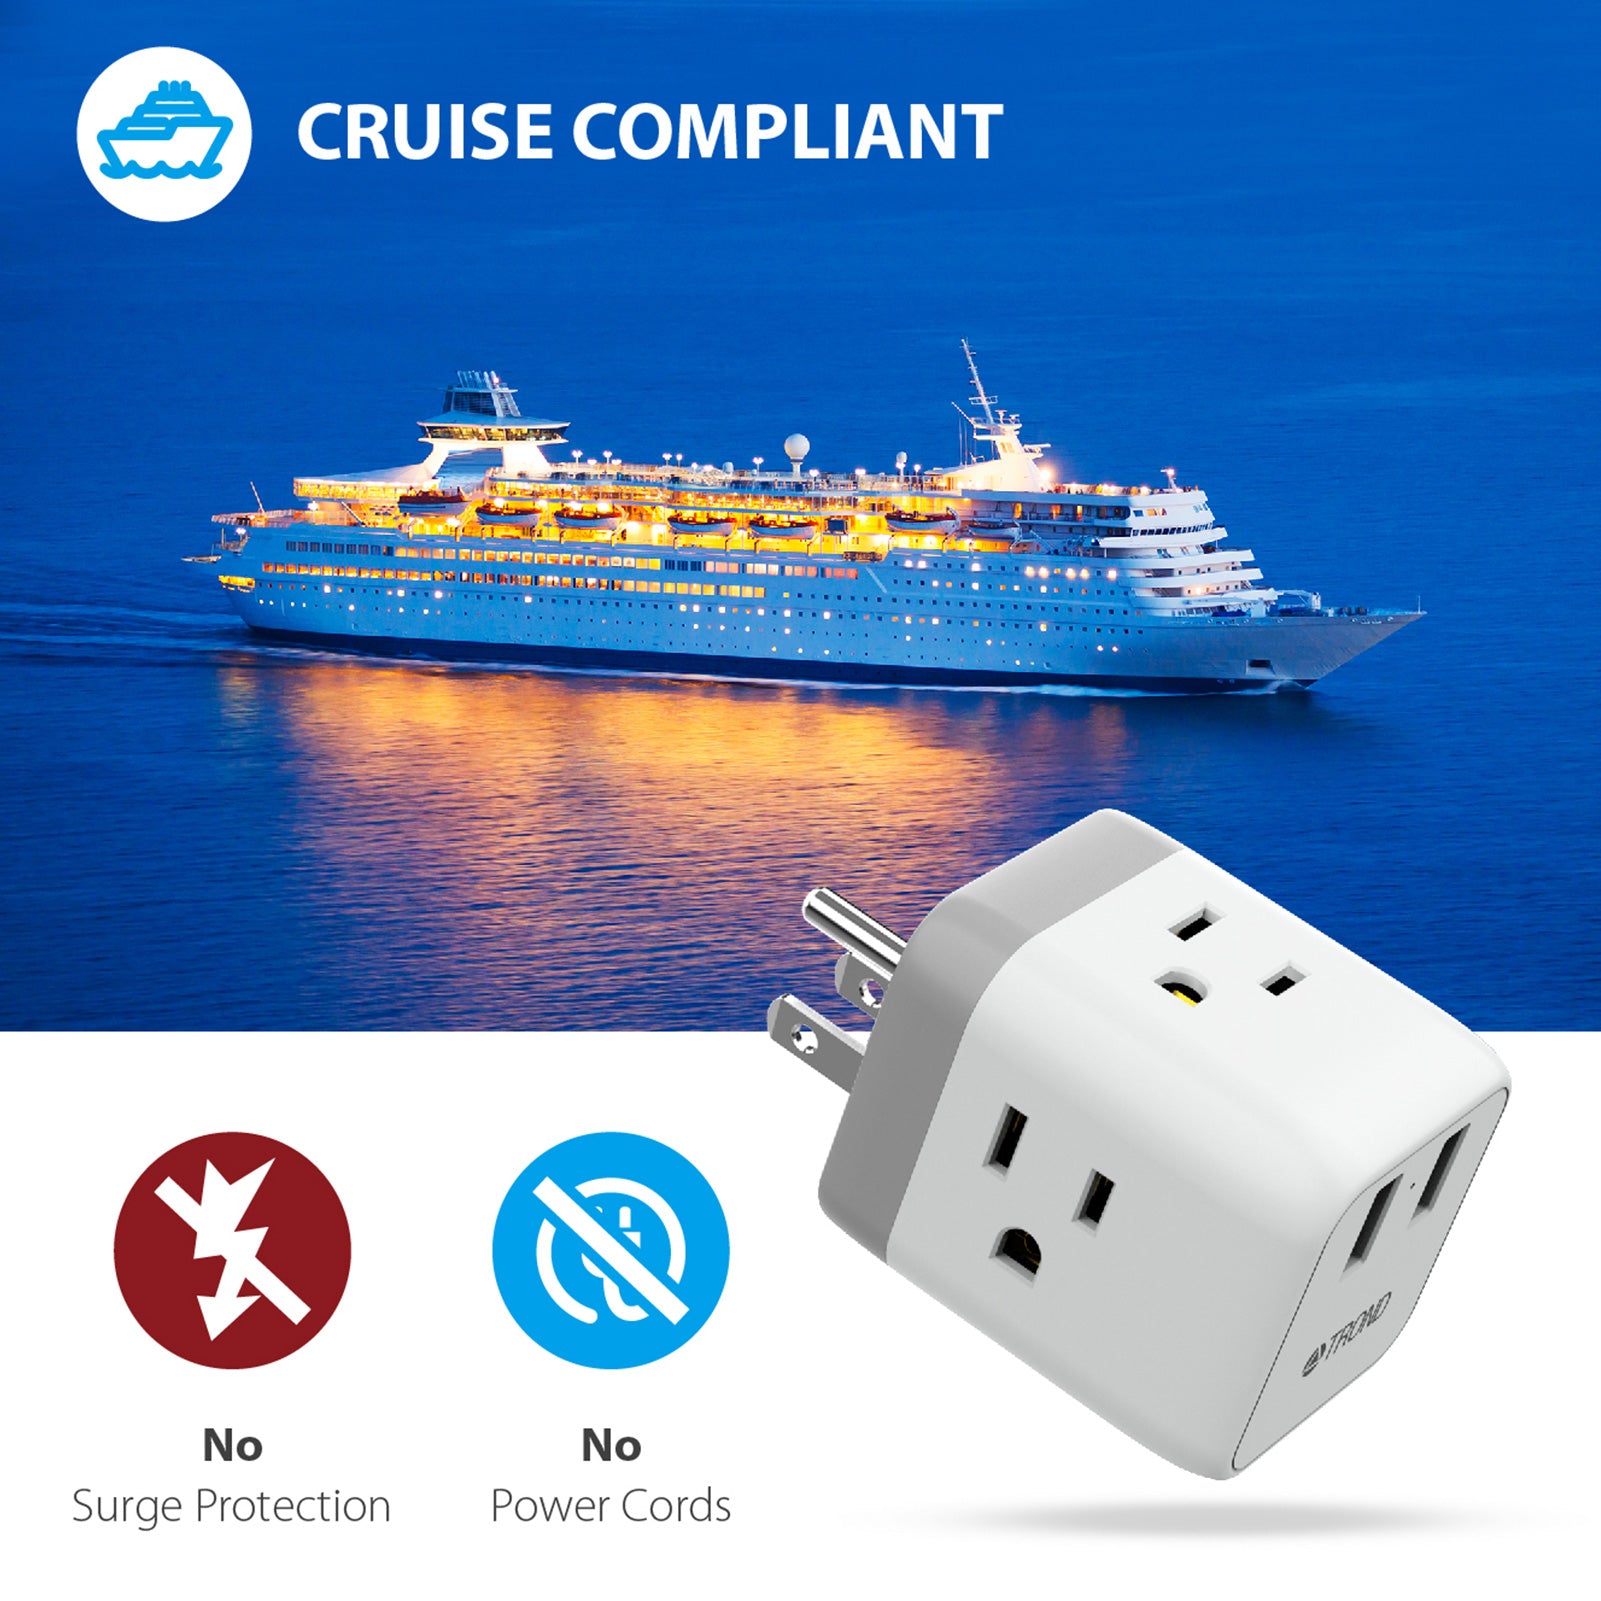 3-Outlet USB Wall Charger and Extender with 3-Way Splitter, ETL Listed -  For Home, Office, Cruise Ship